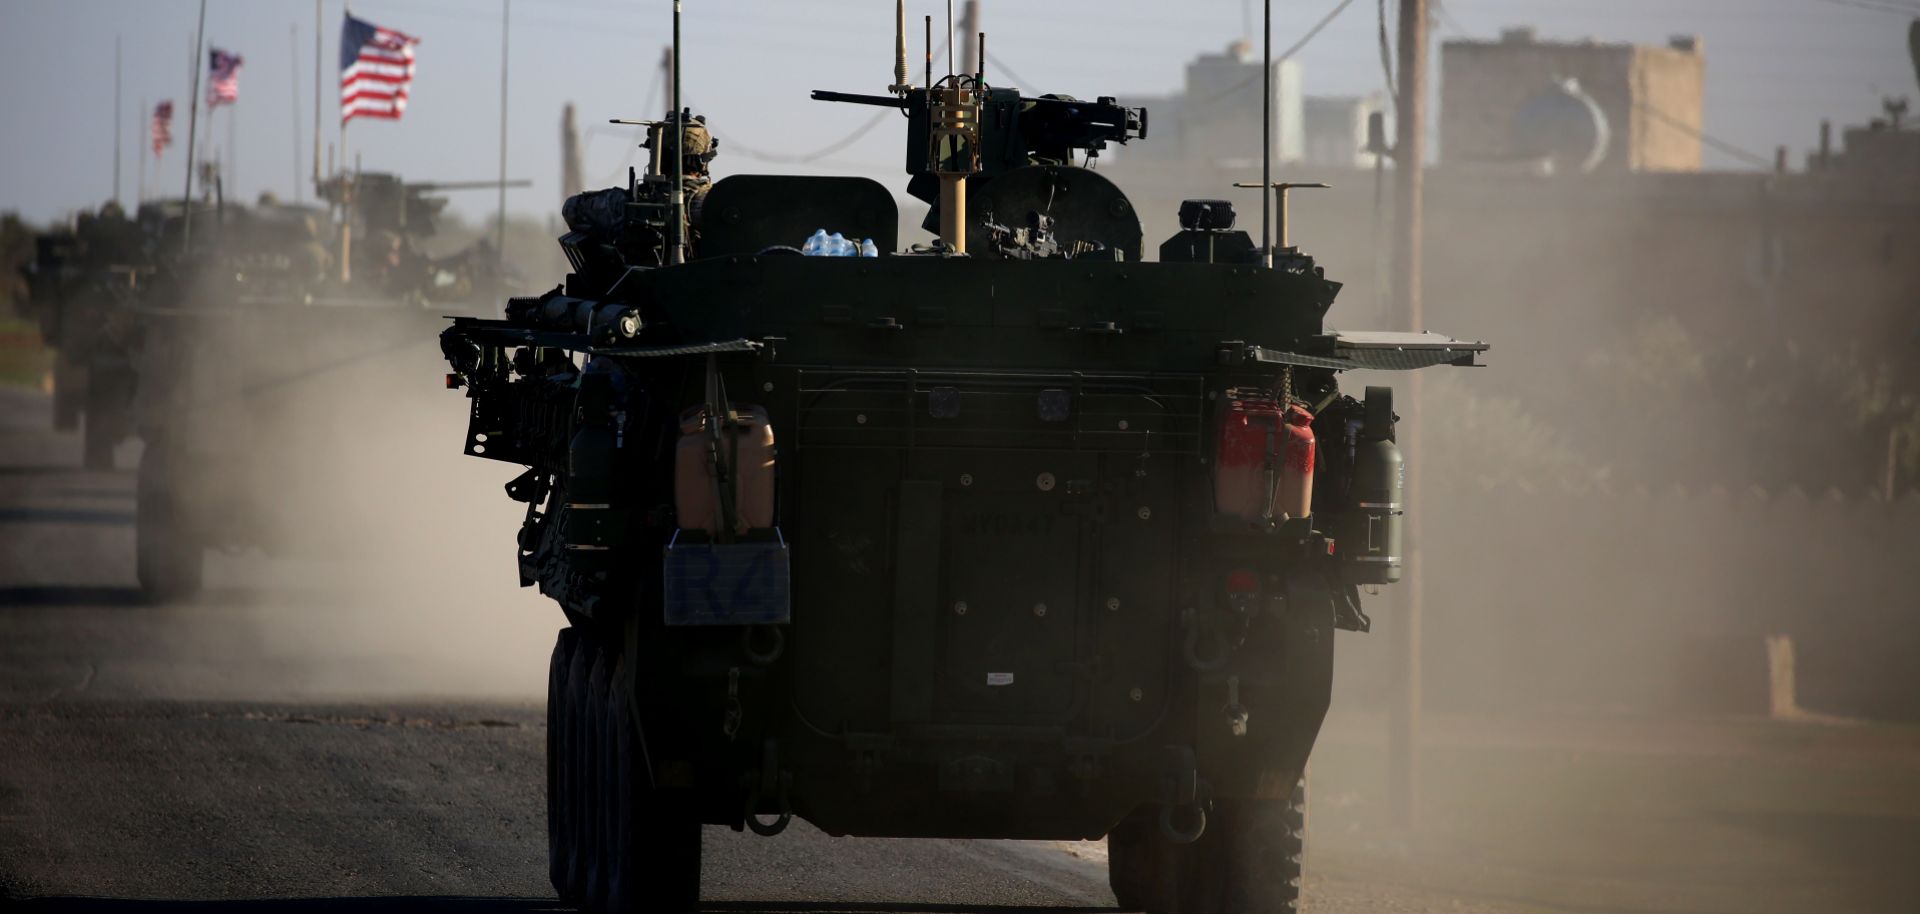 A convoy of U.S. armored vehicles passes through a village near Manbij, Syria, during March 2017.